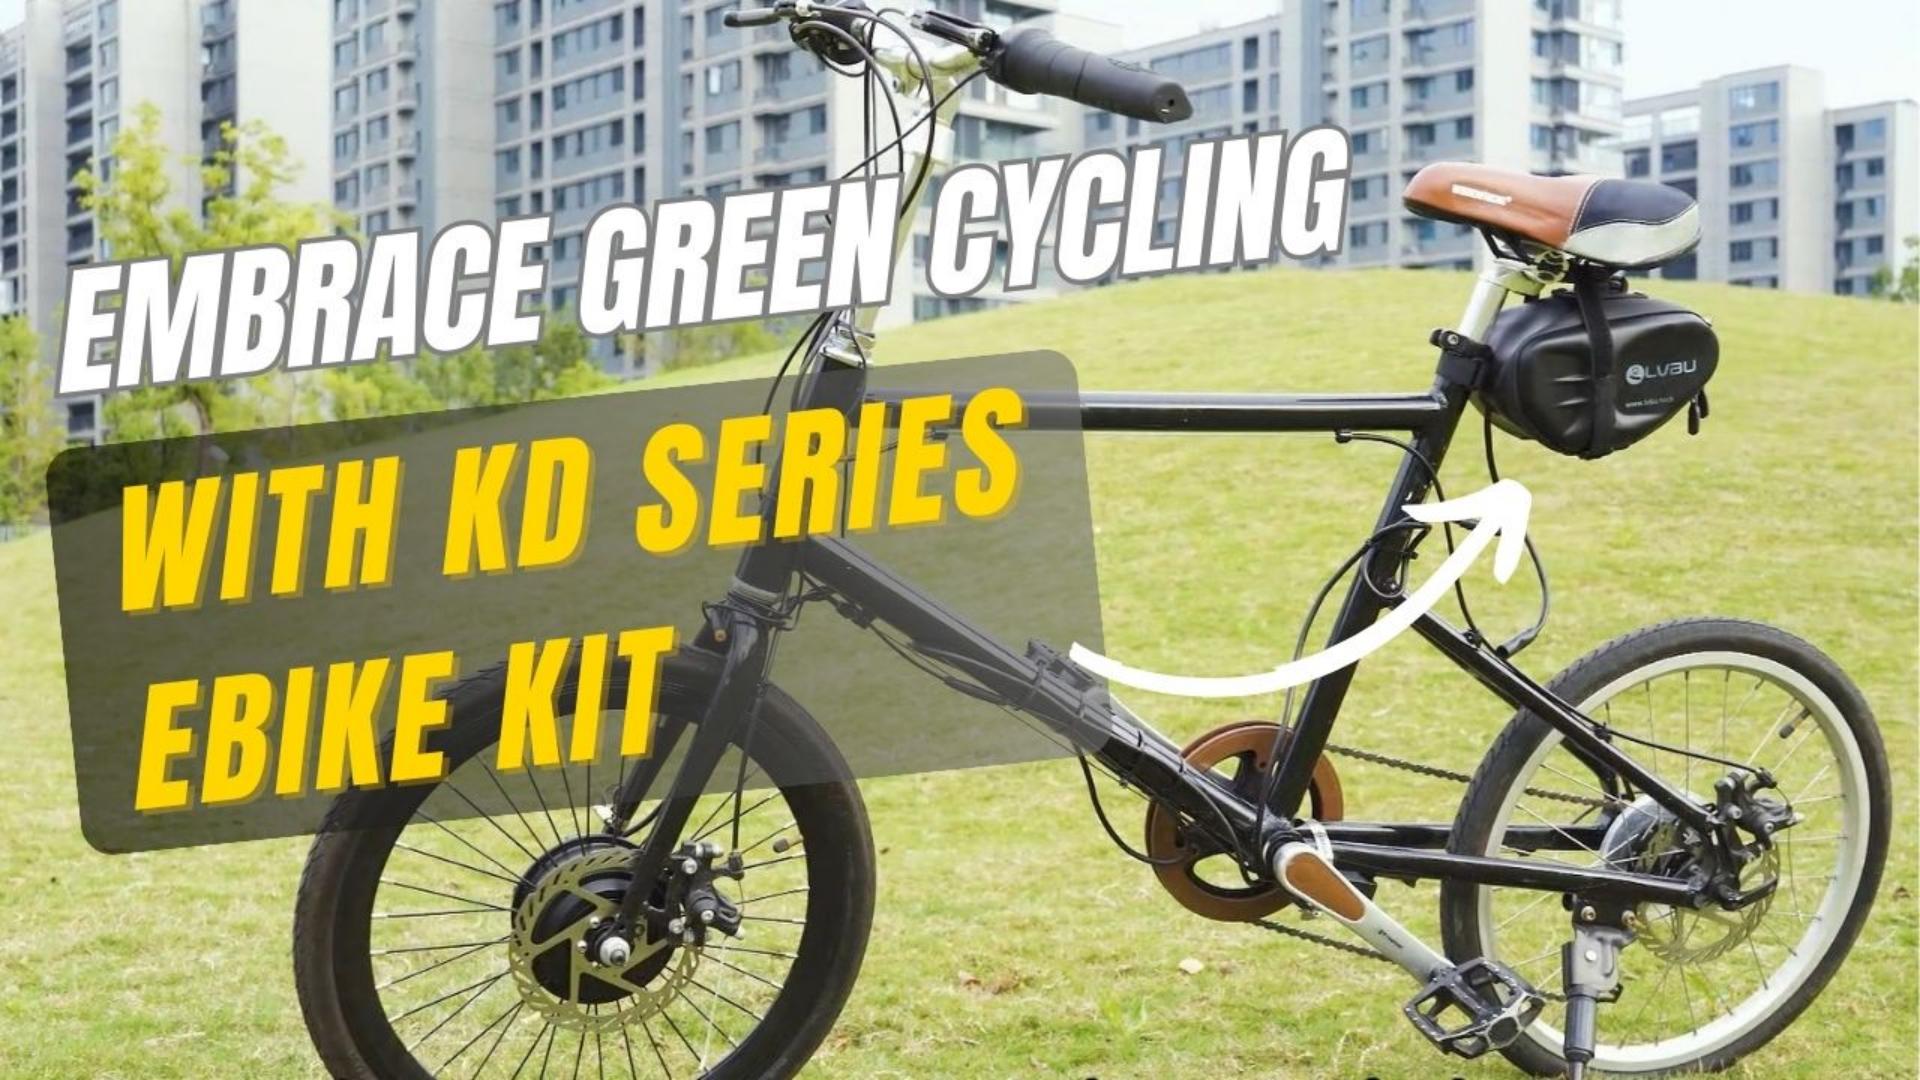 Embrace Green Cycling with KD Series Ebike Kit.